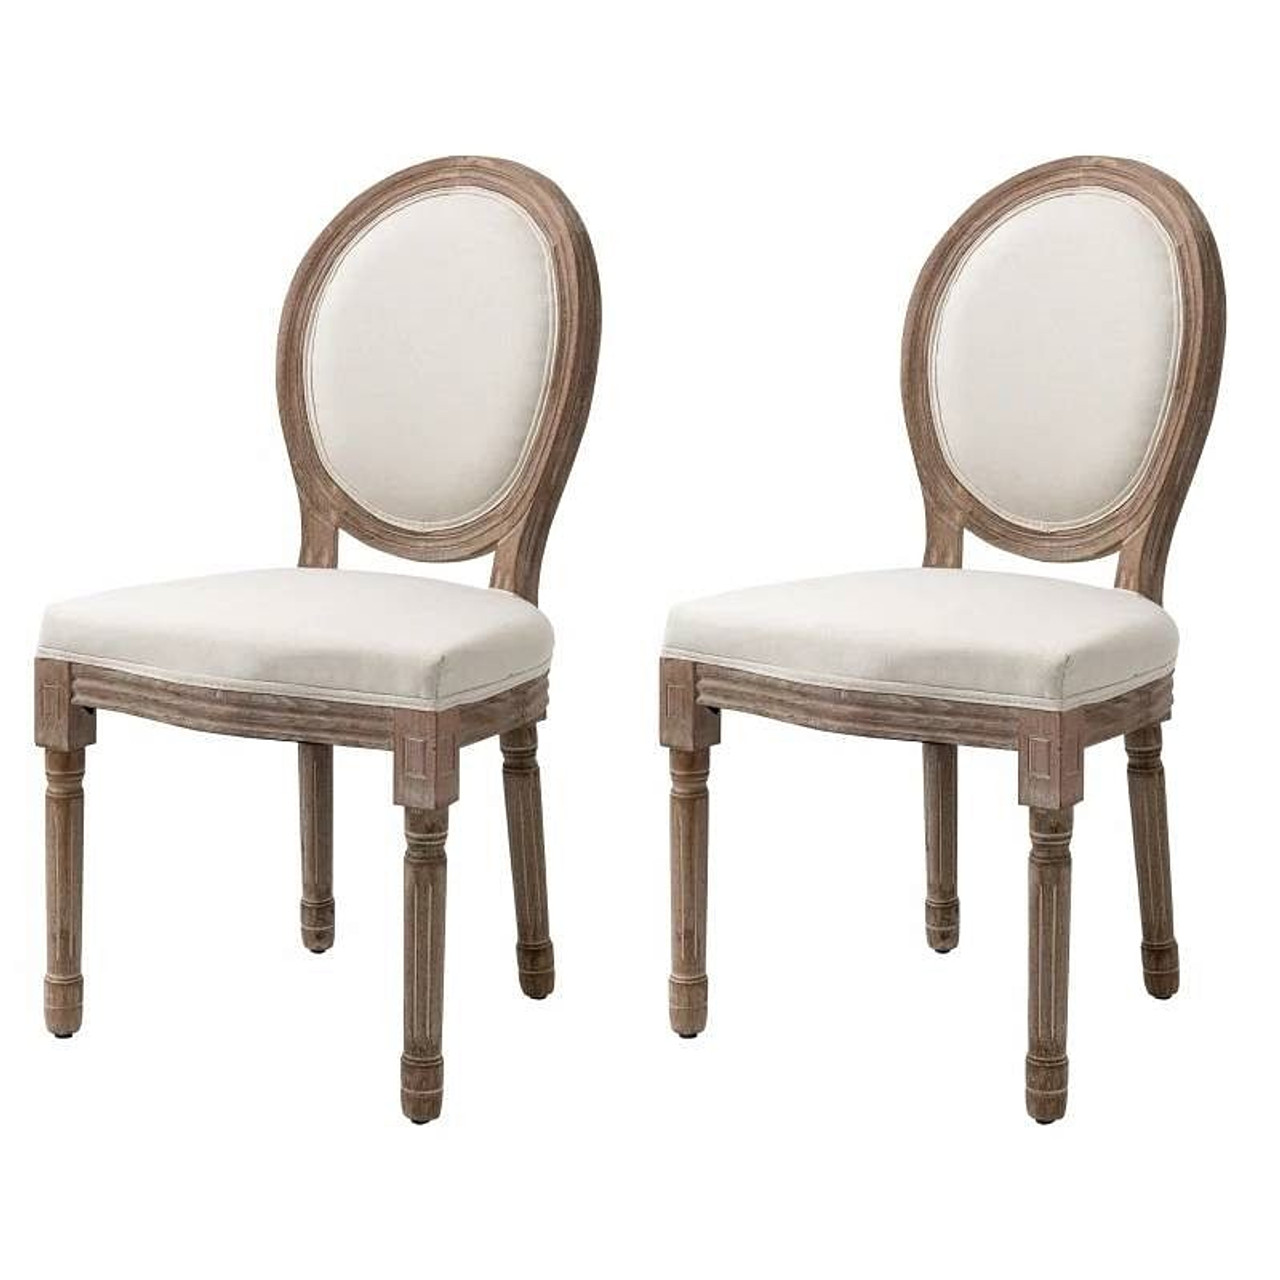 Set of 2 Vintage Upholstered Armless Curved Back Dining Chairs Creamy White